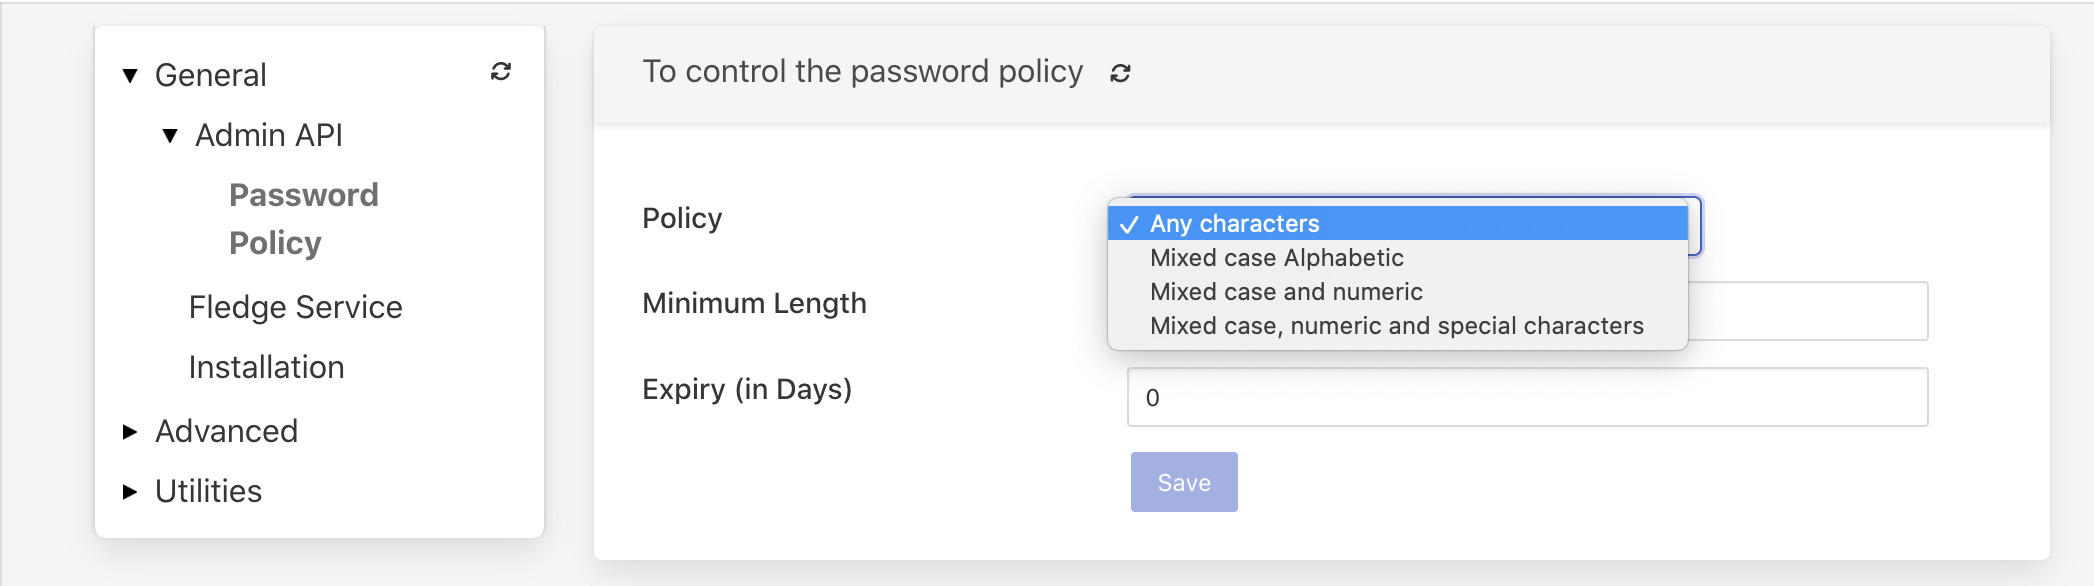 password_policy